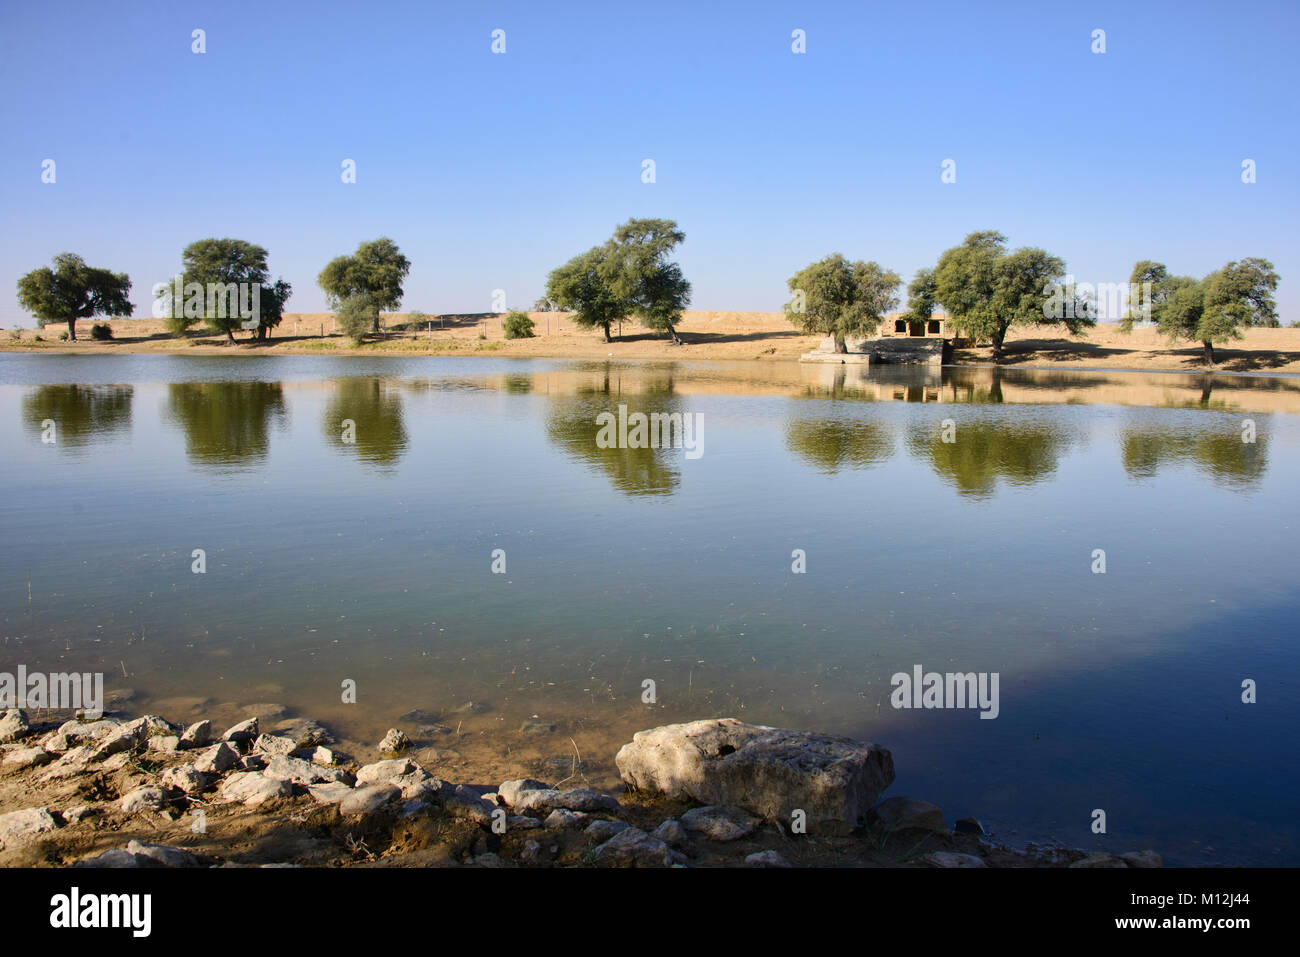 Oasis in the Thar Desert, Rajasthan, India Stock Photo